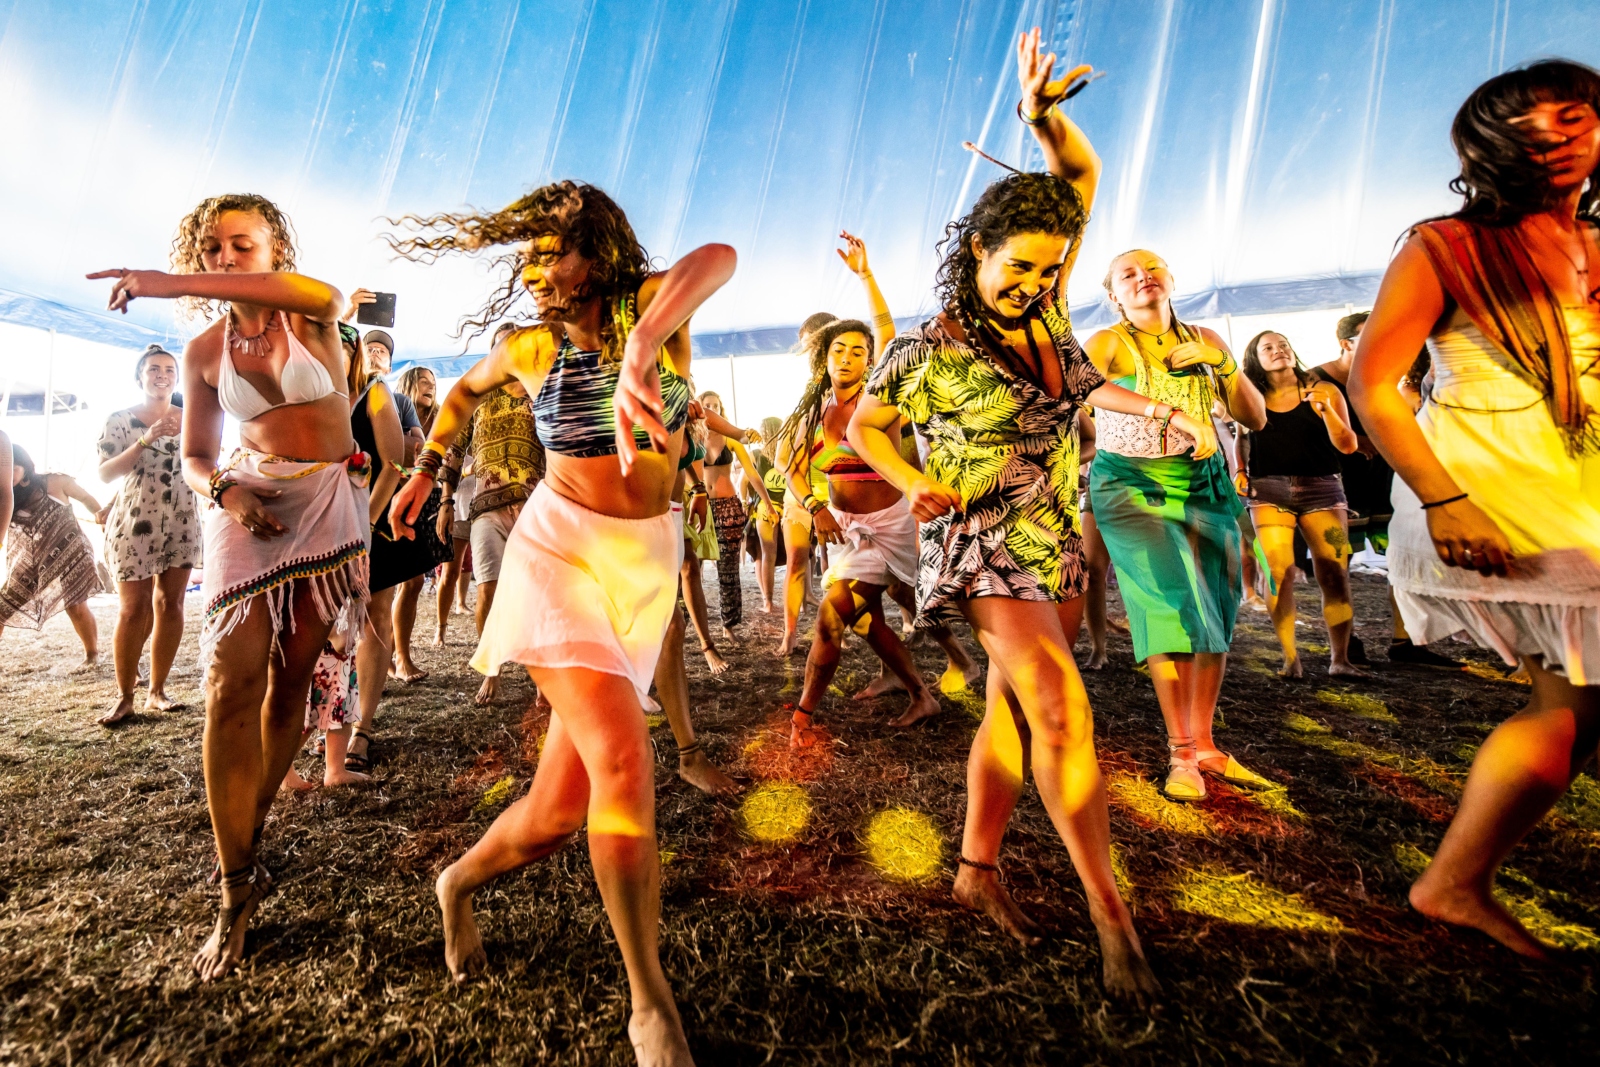 Island Vibe Festival Camping and Road Trip - Stoke Travel